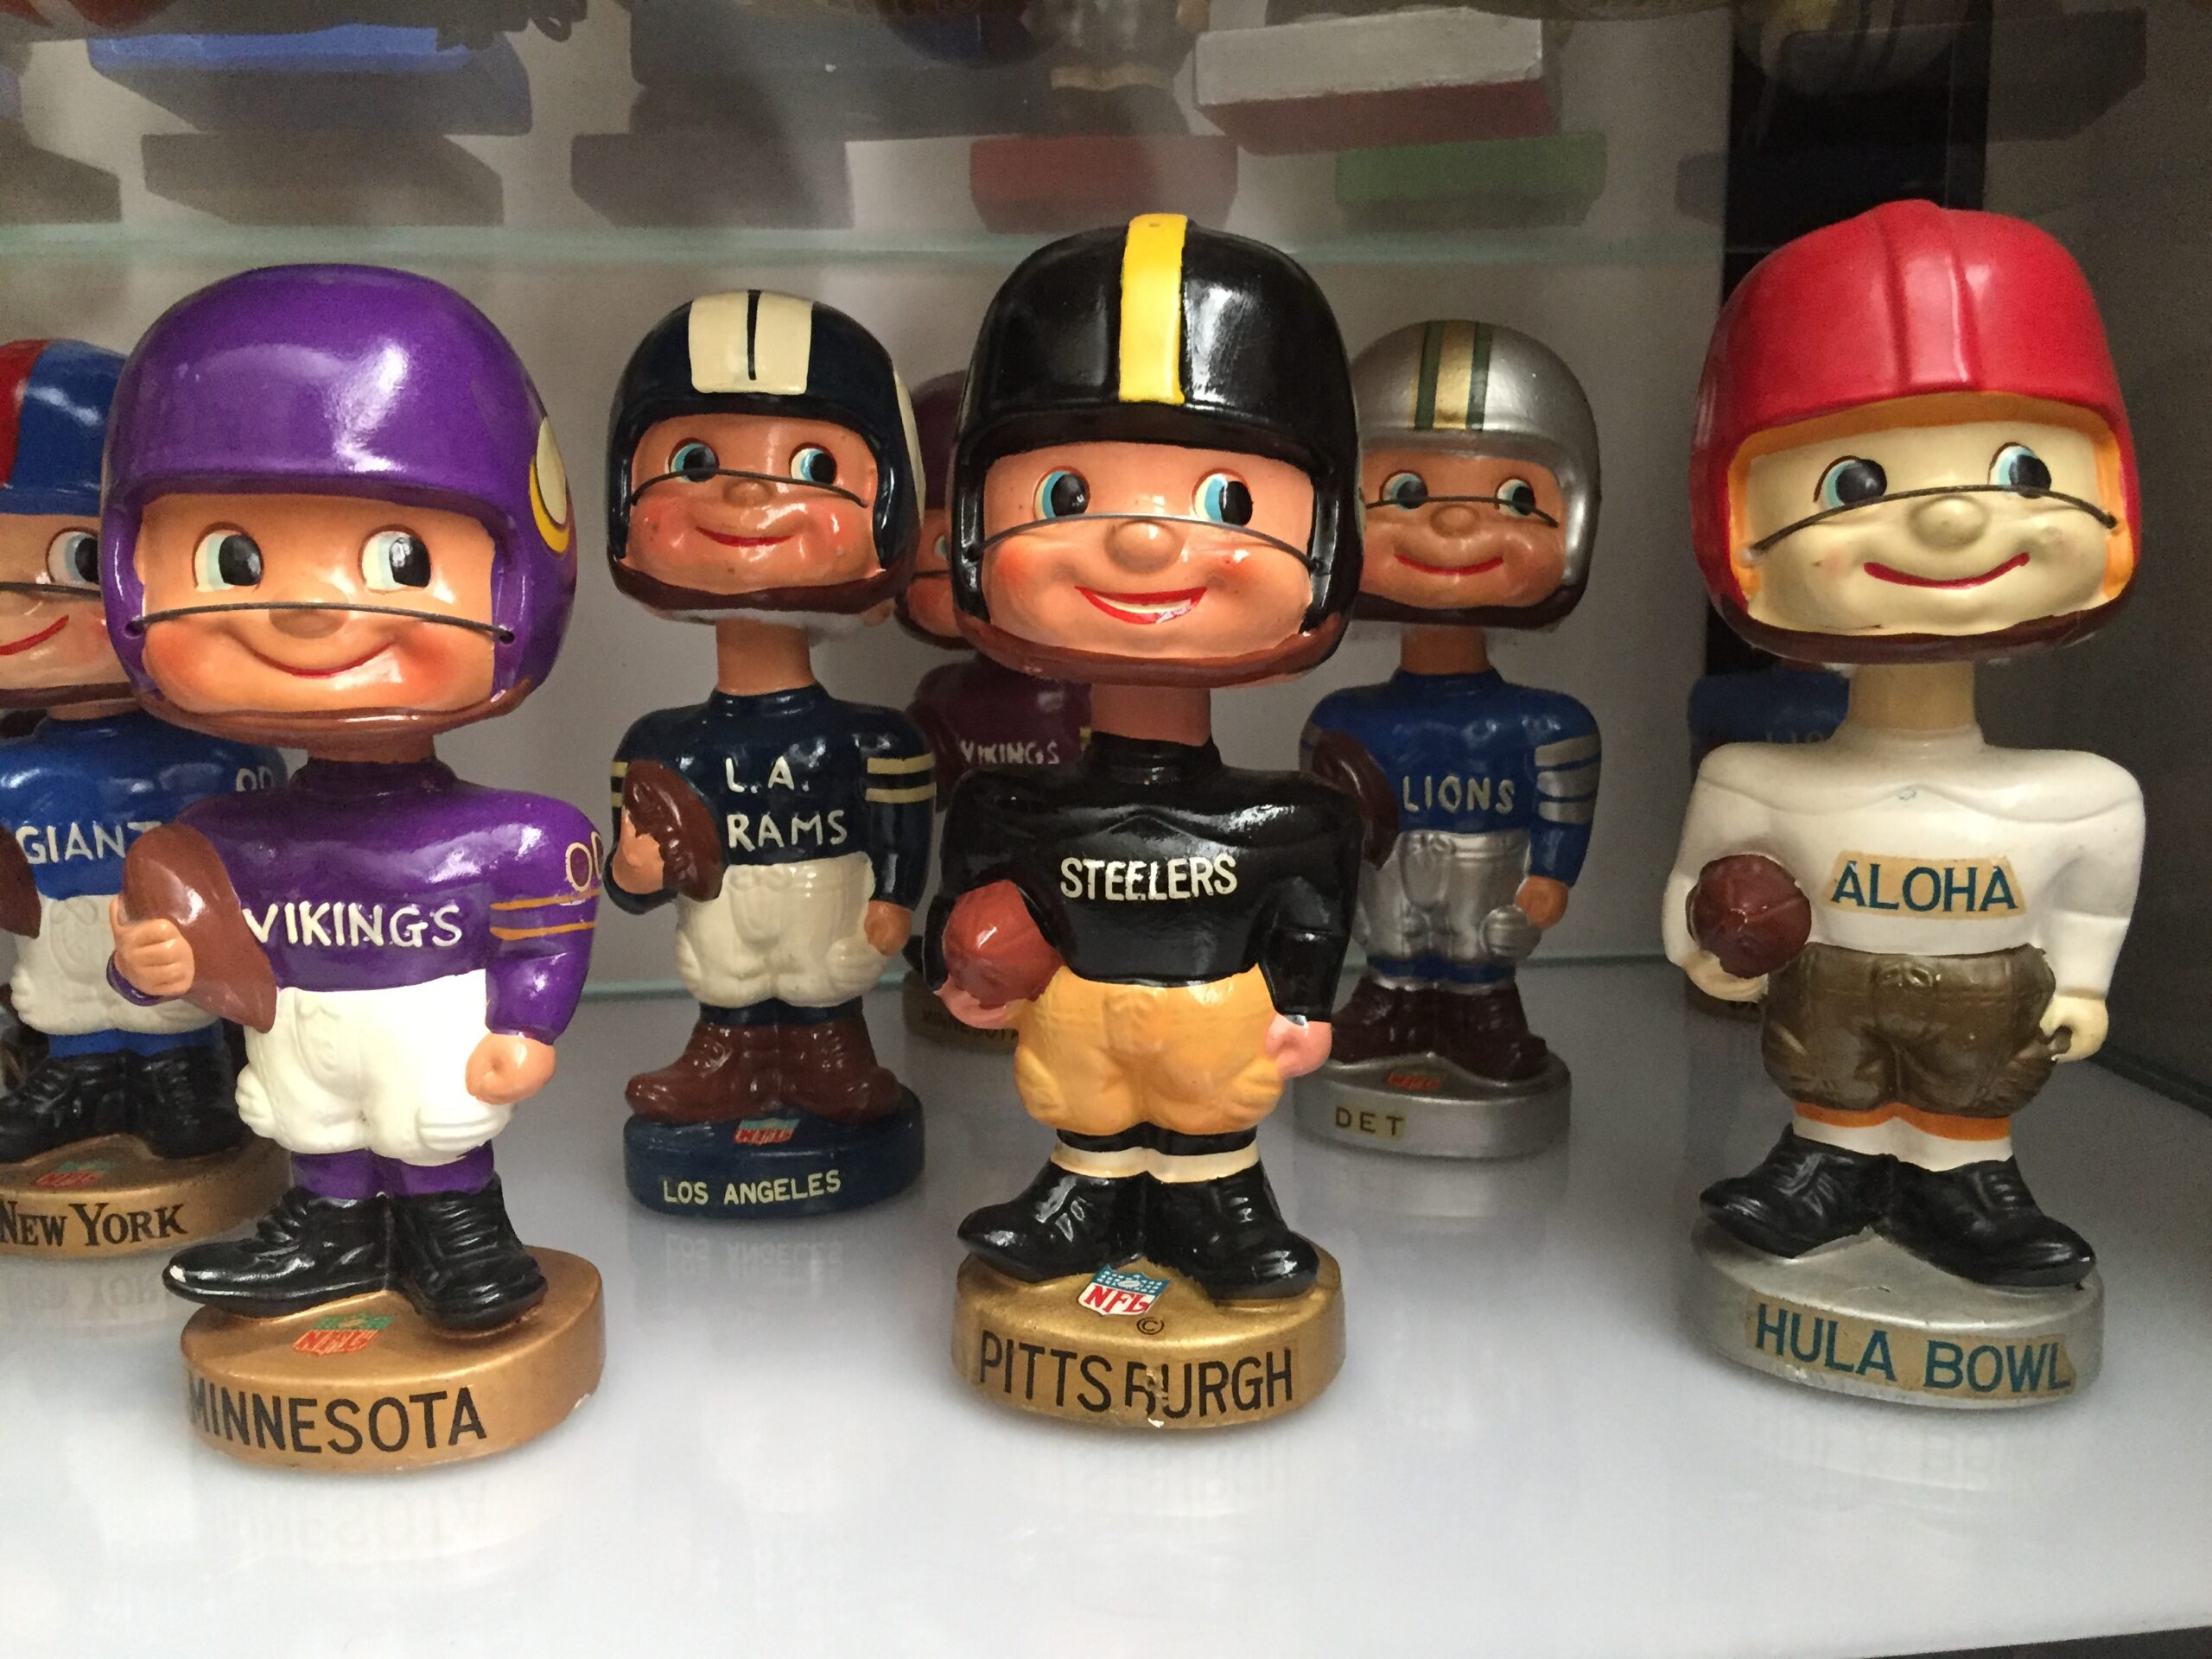 How to determine how to build your bobblehead collection